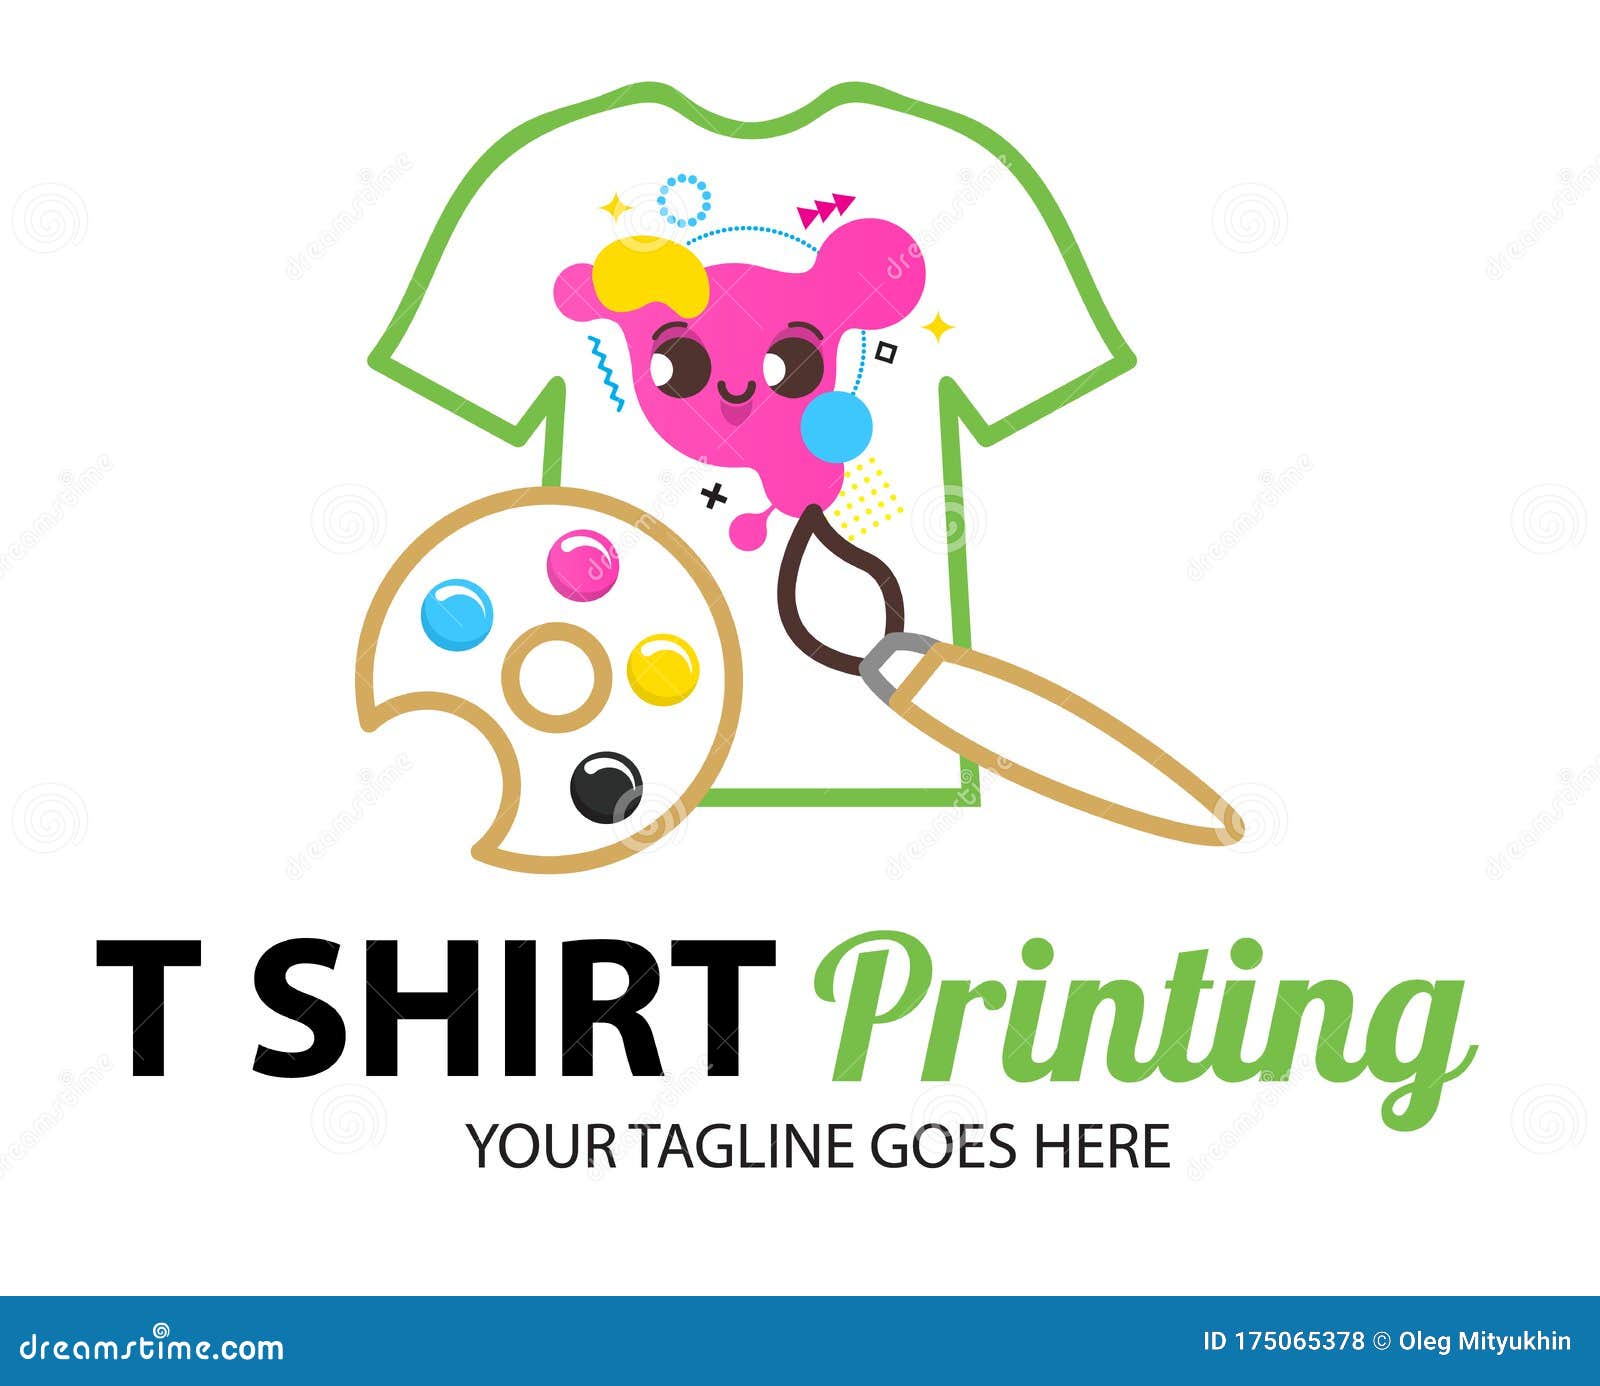 Tshirt Printing Cmyk Palette Concept. Abstract Modern Colored Vector ...